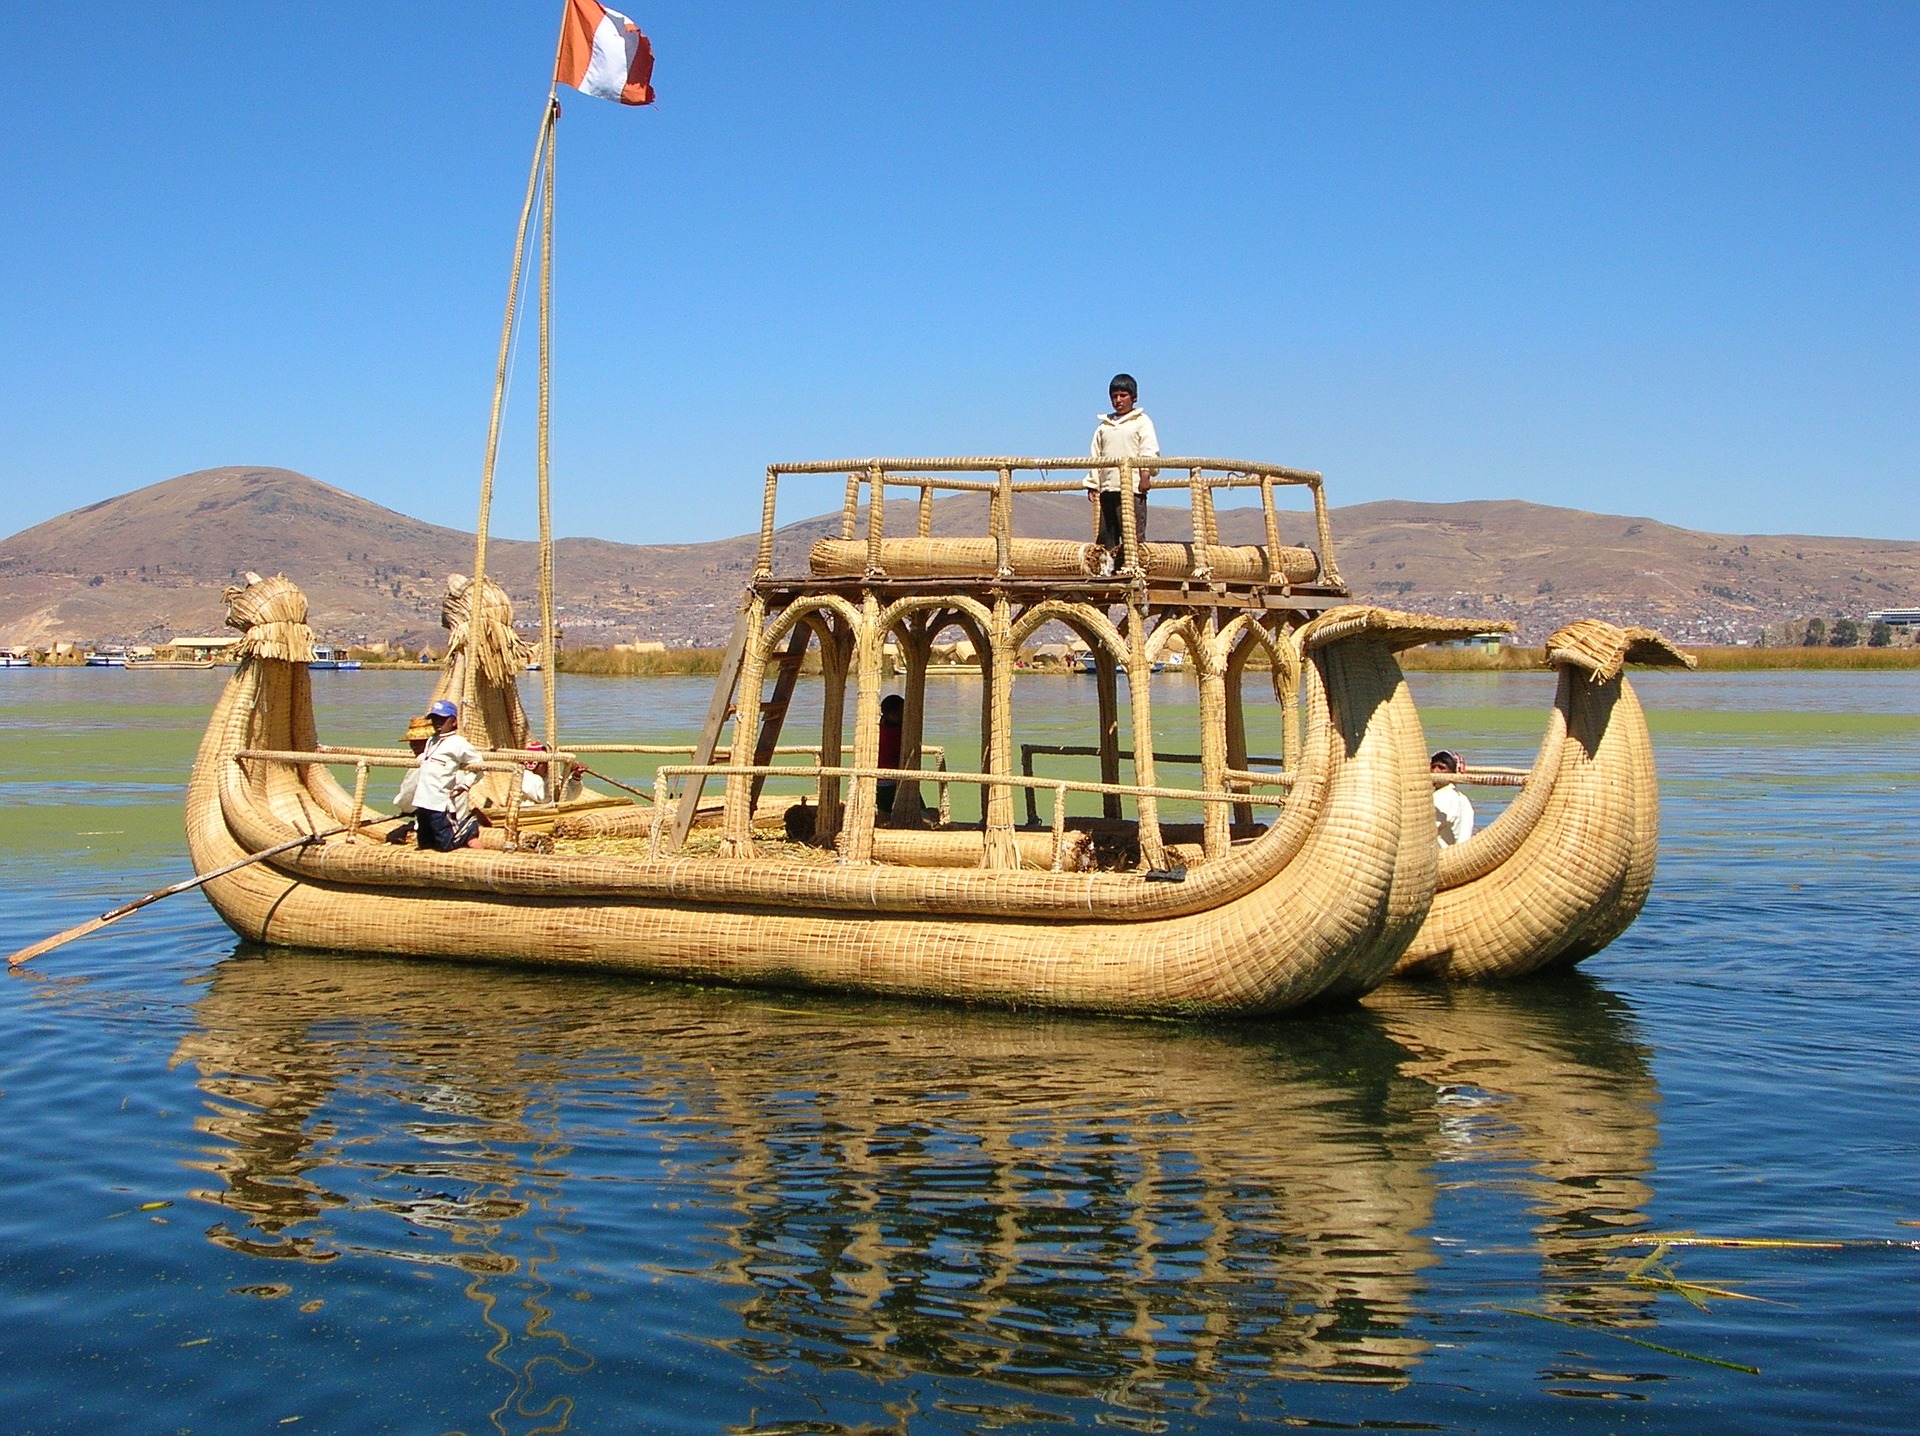 lake-titicaca-indigenous image showcases cultural heritage